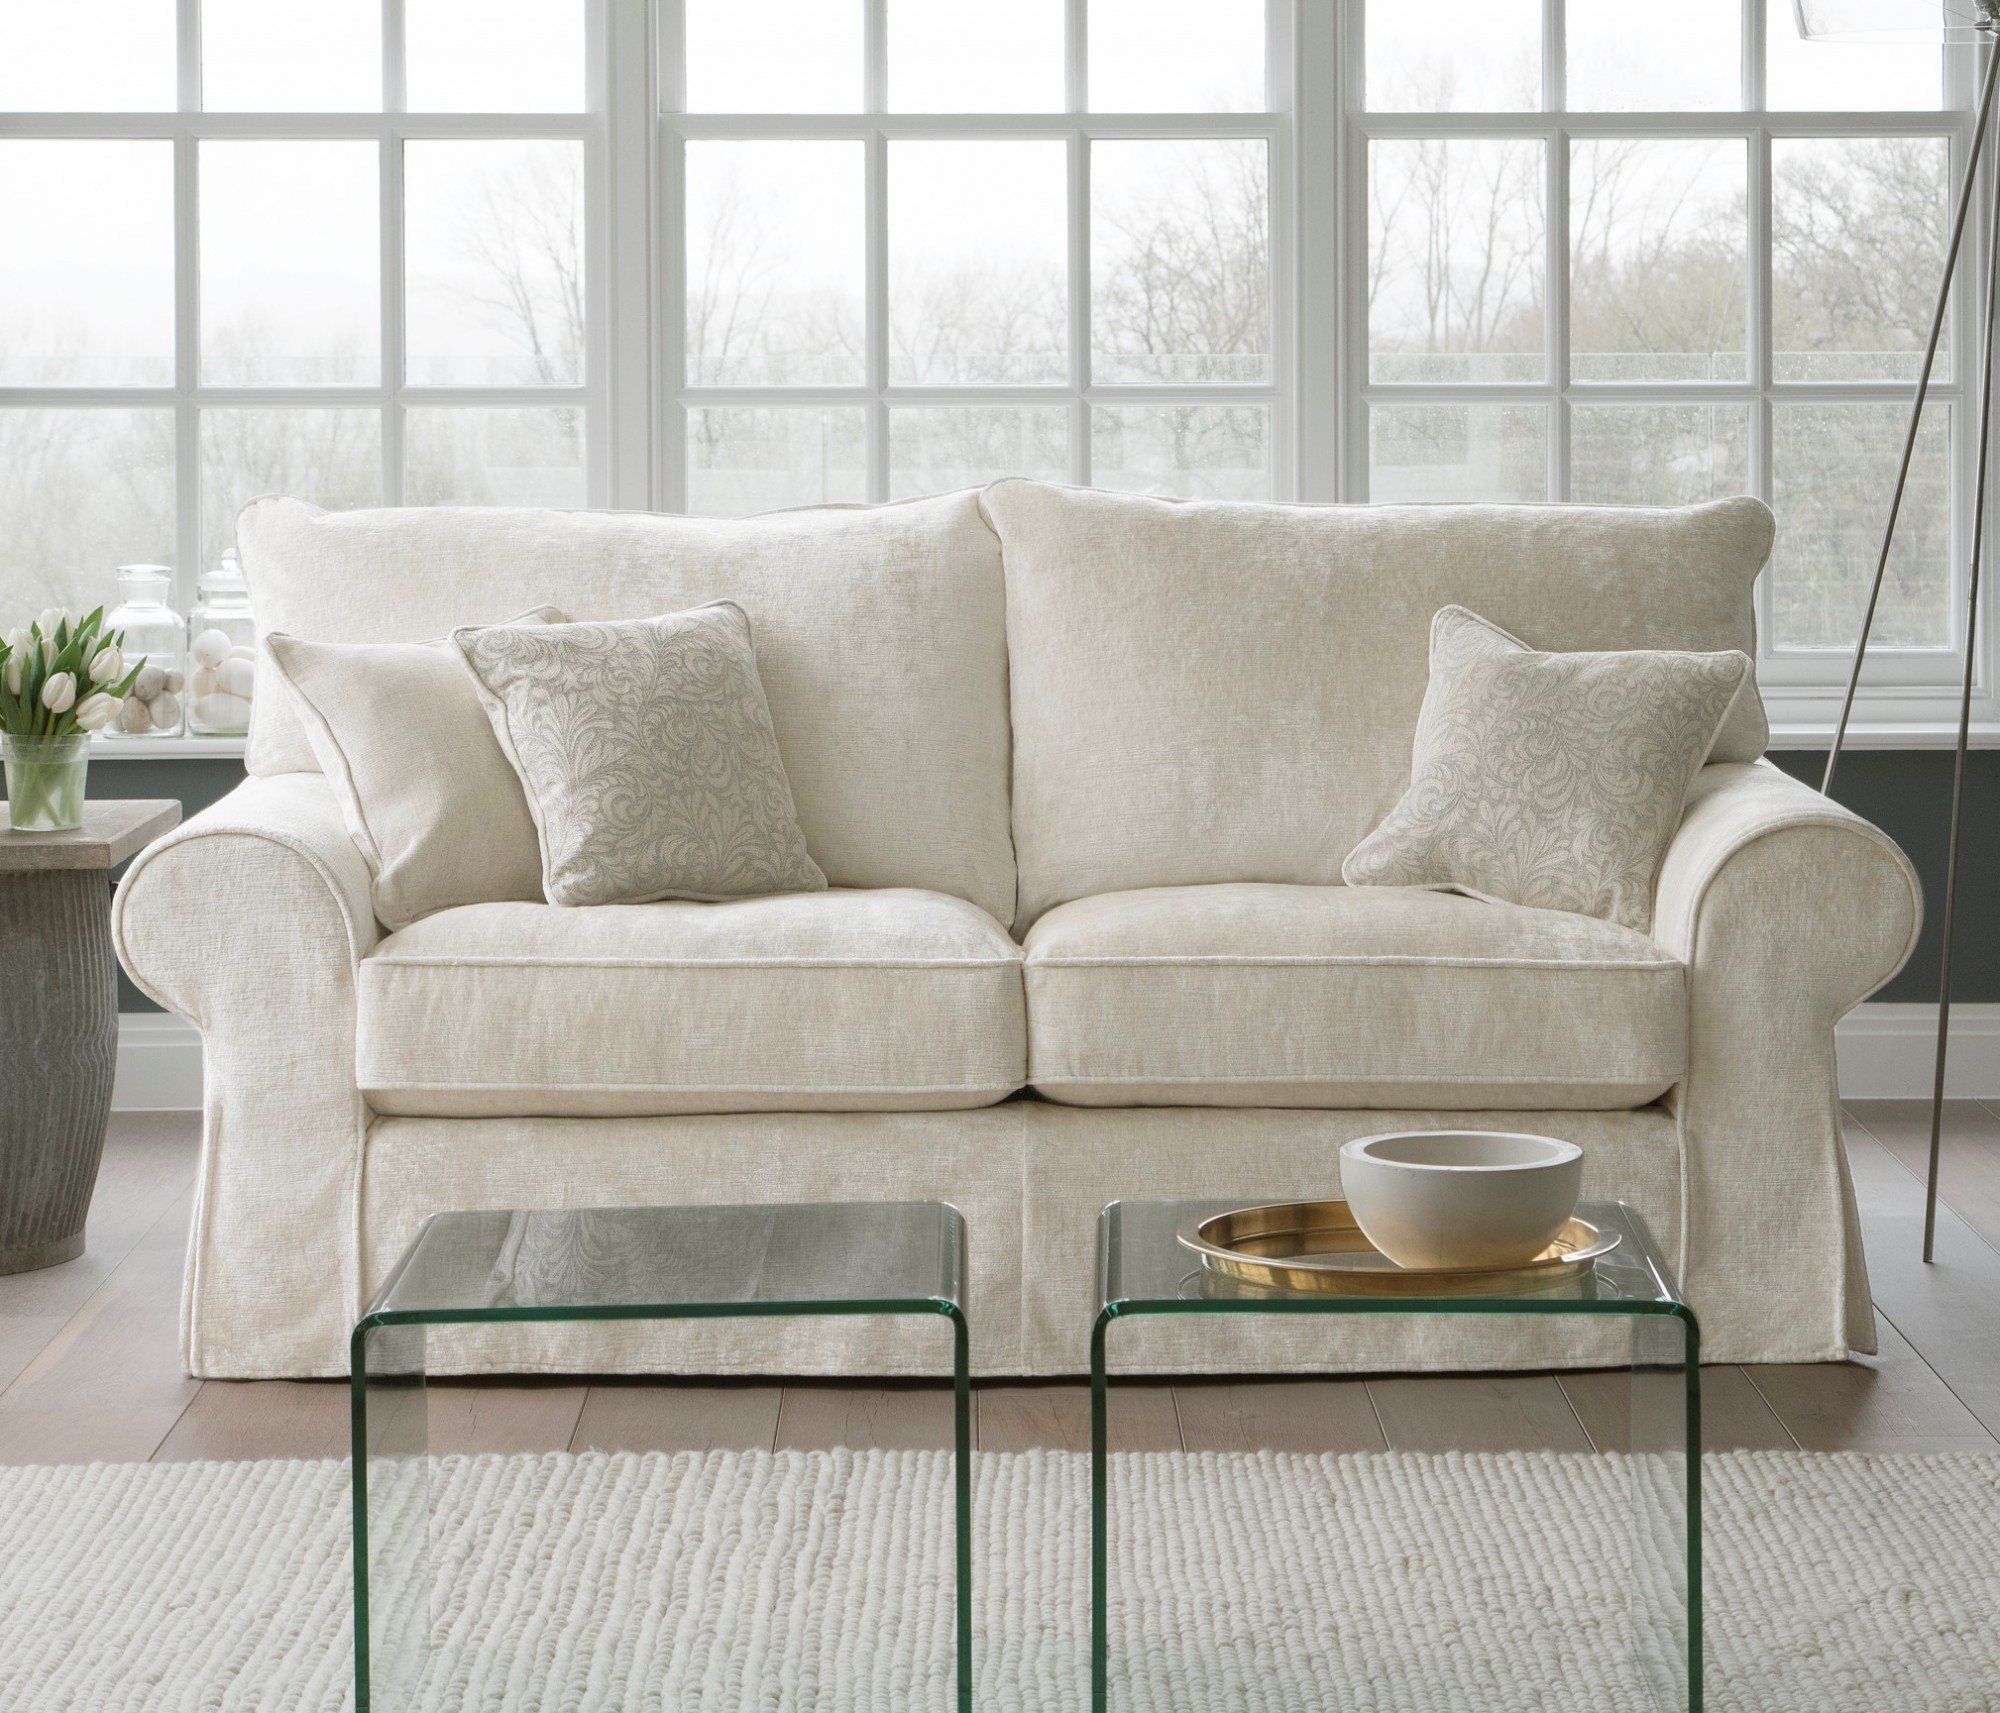 Collins and Hayes Lavinia sofa and chair collection 